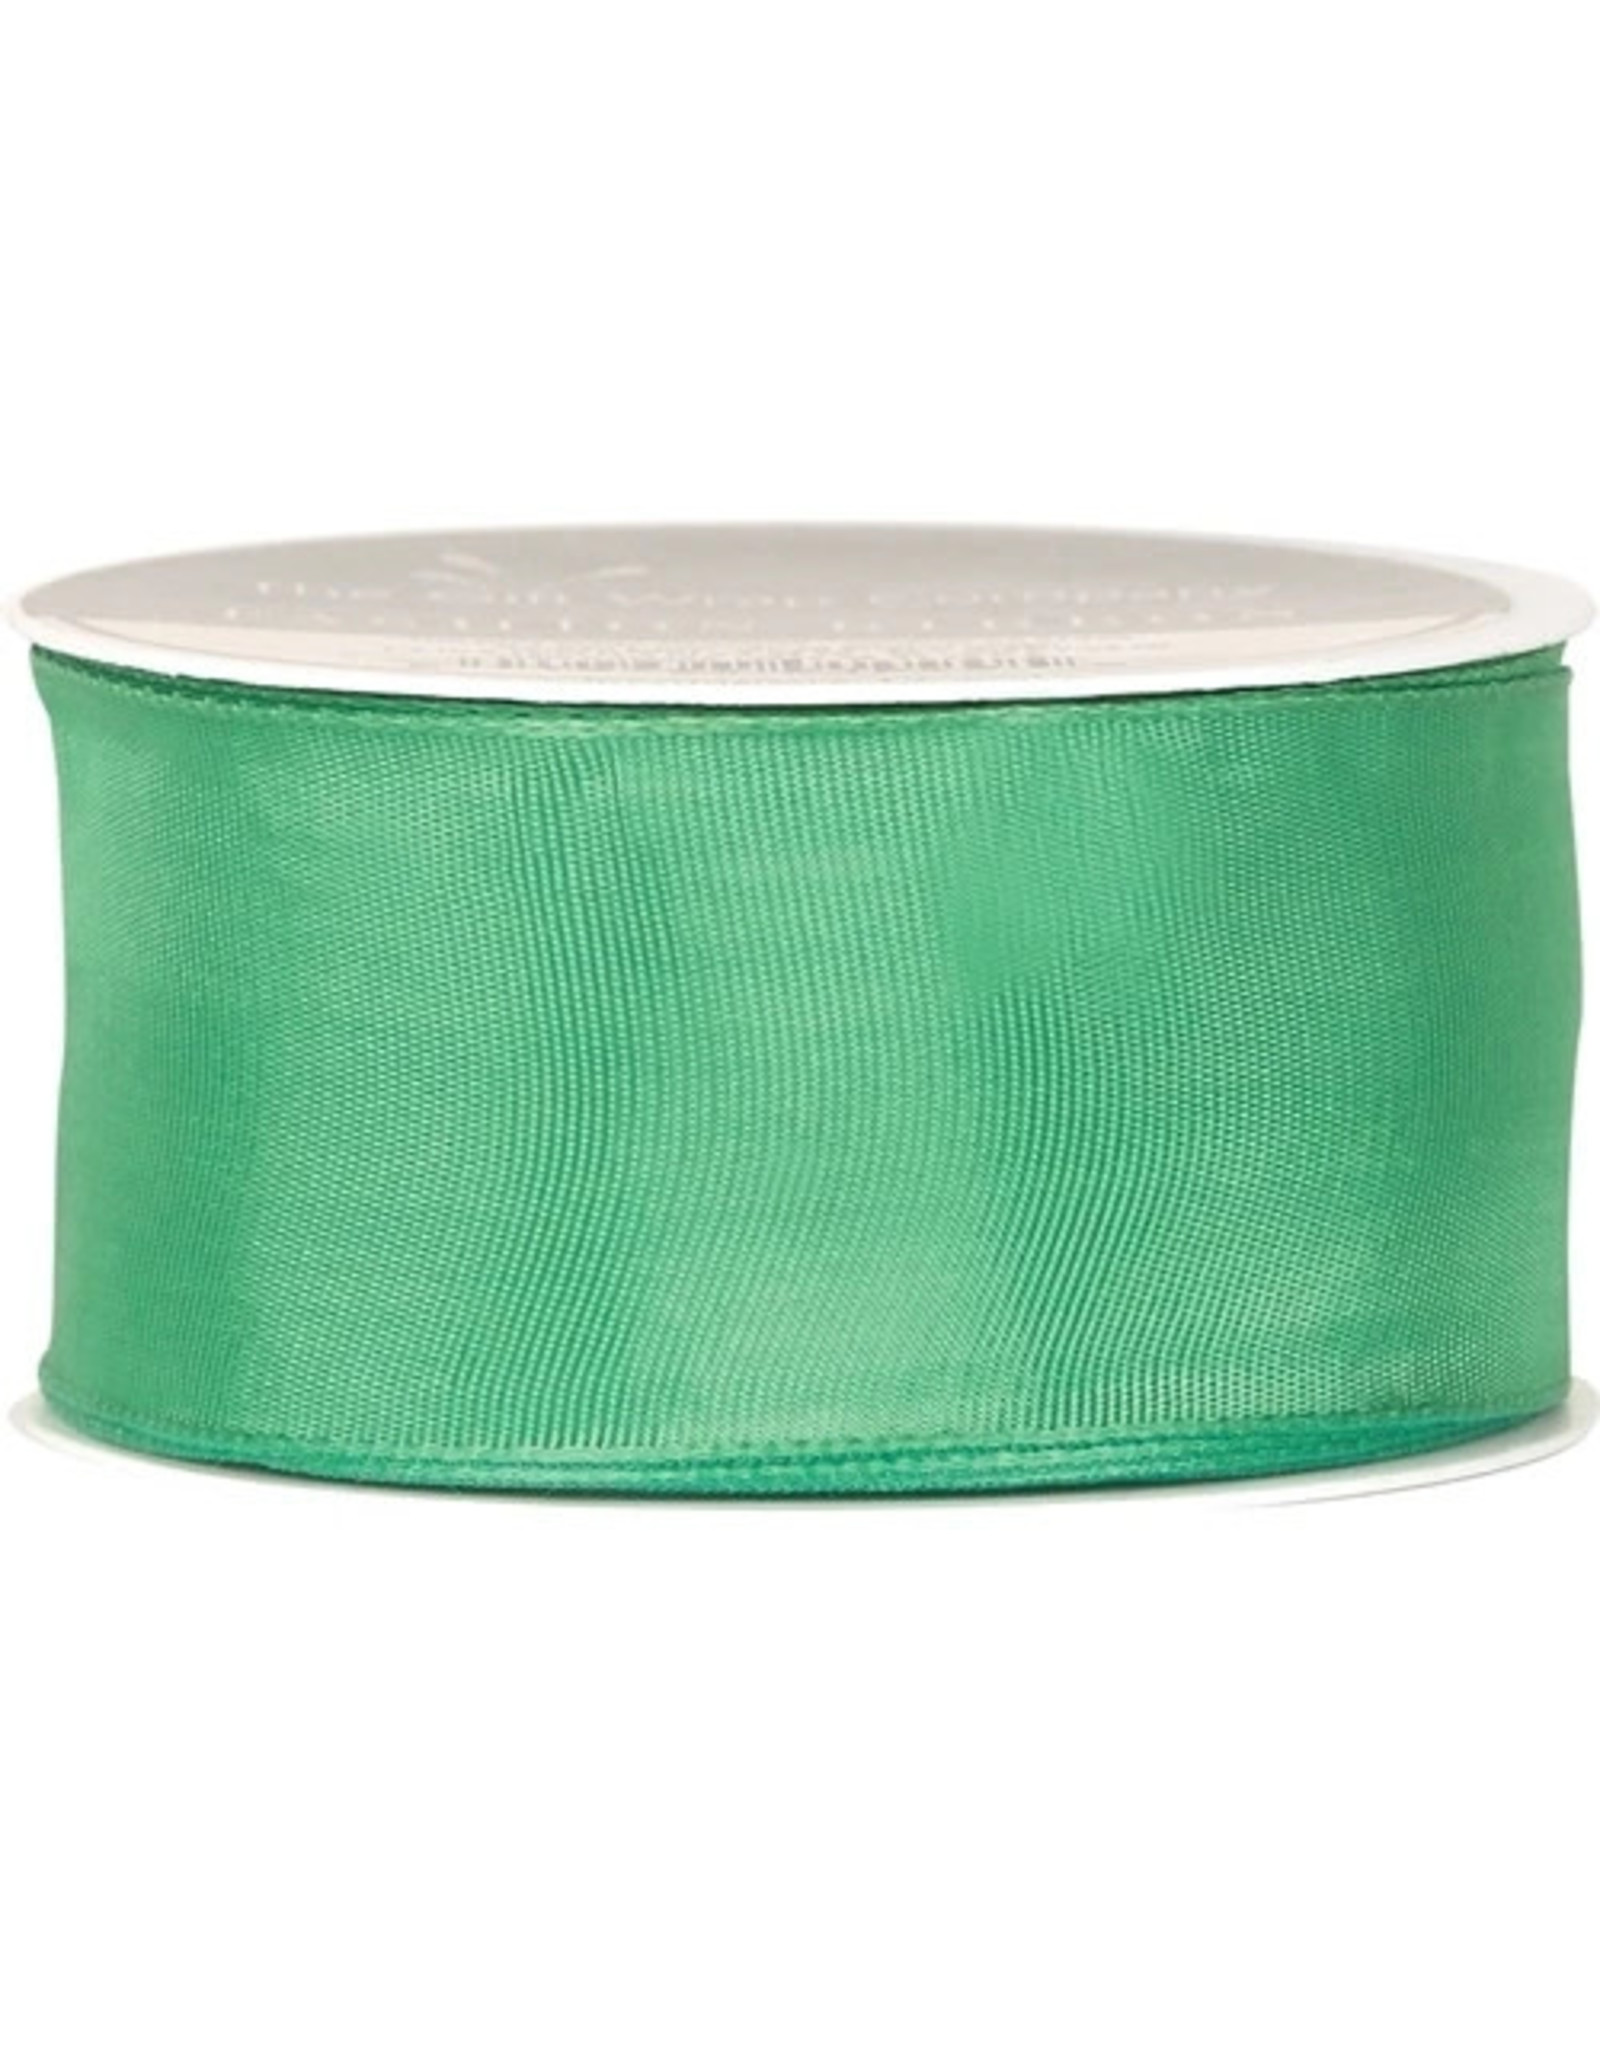 The Gift Wrap Company Bright Green Wired Edge Ribbon